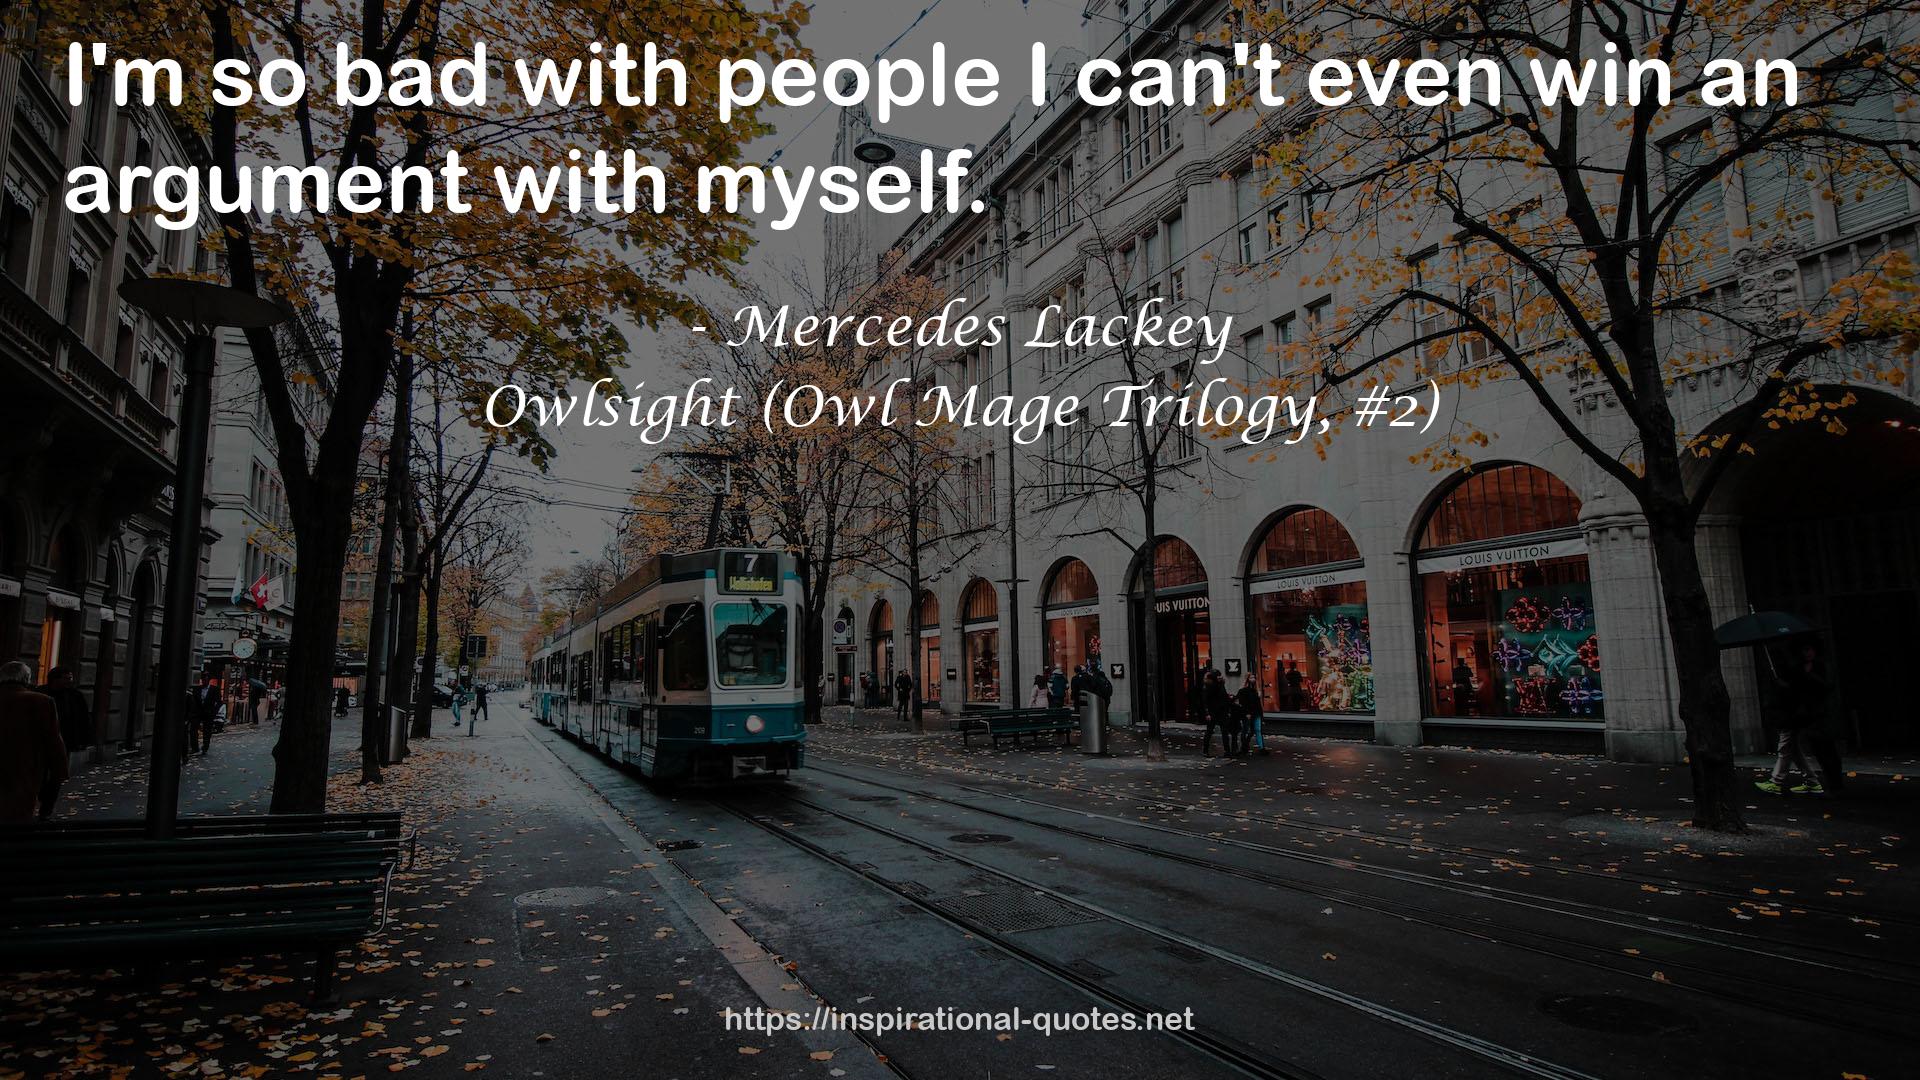 Owlsight (Owl Mage Trilogy, #2) QUOTES